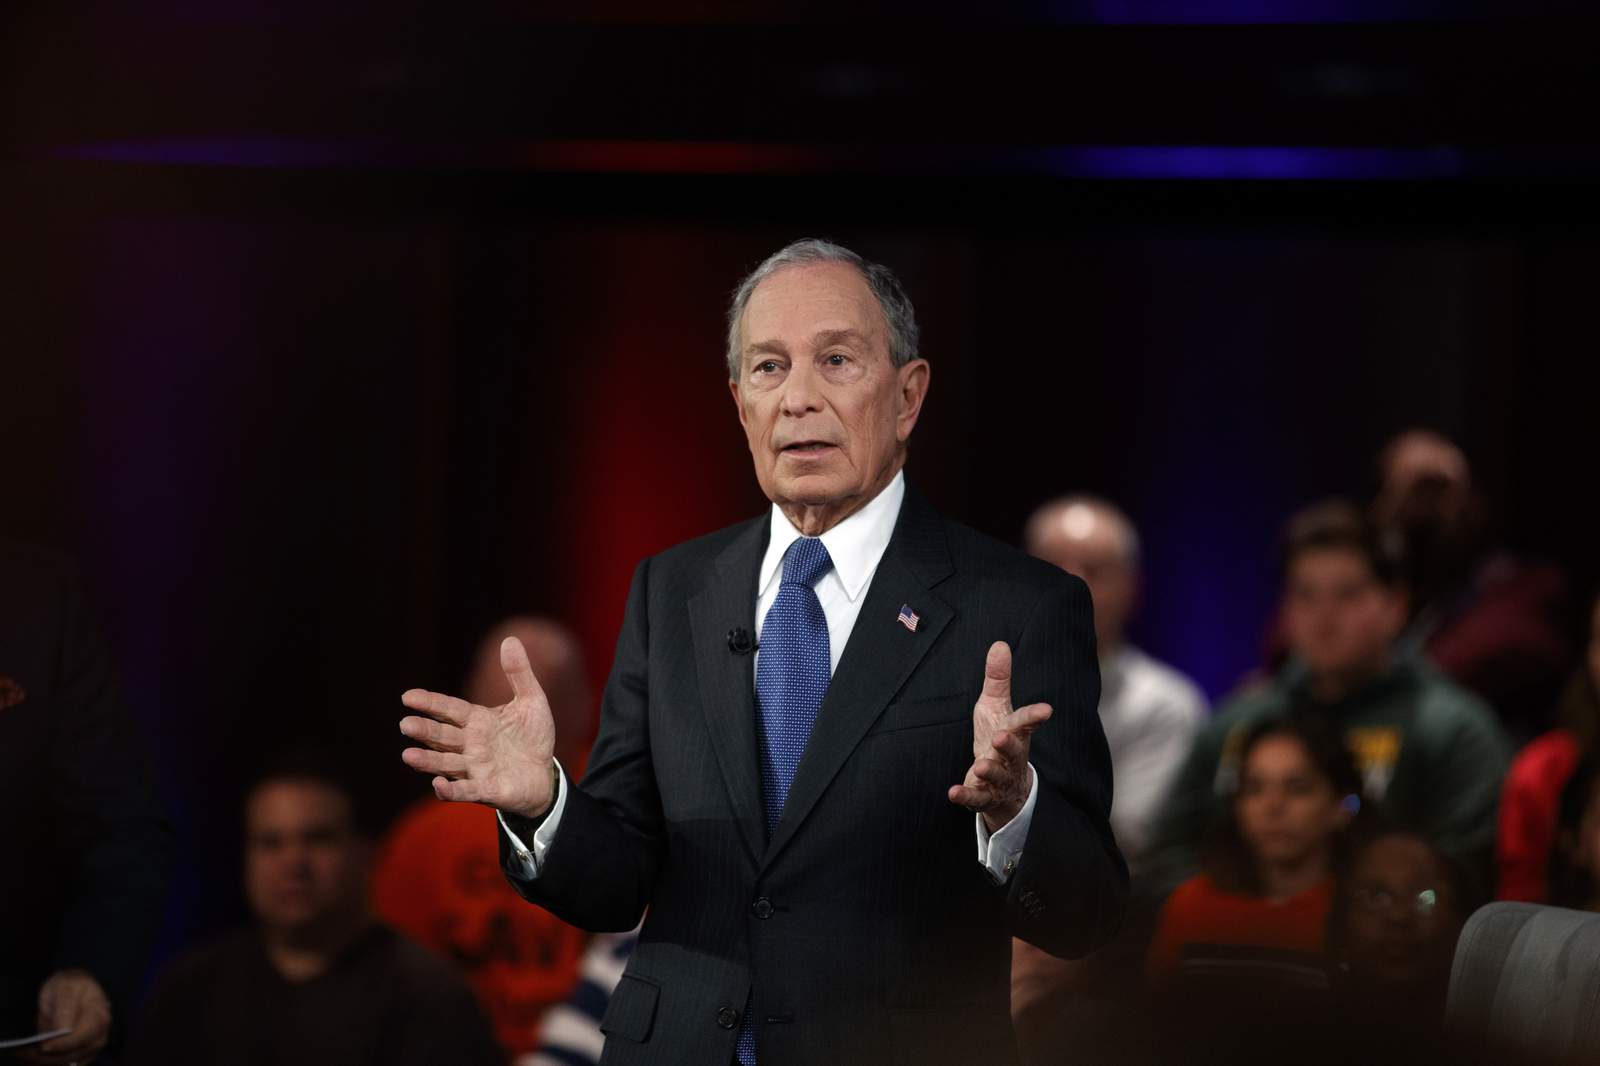 Bloomberg's big spending struggles to sway election outcomes